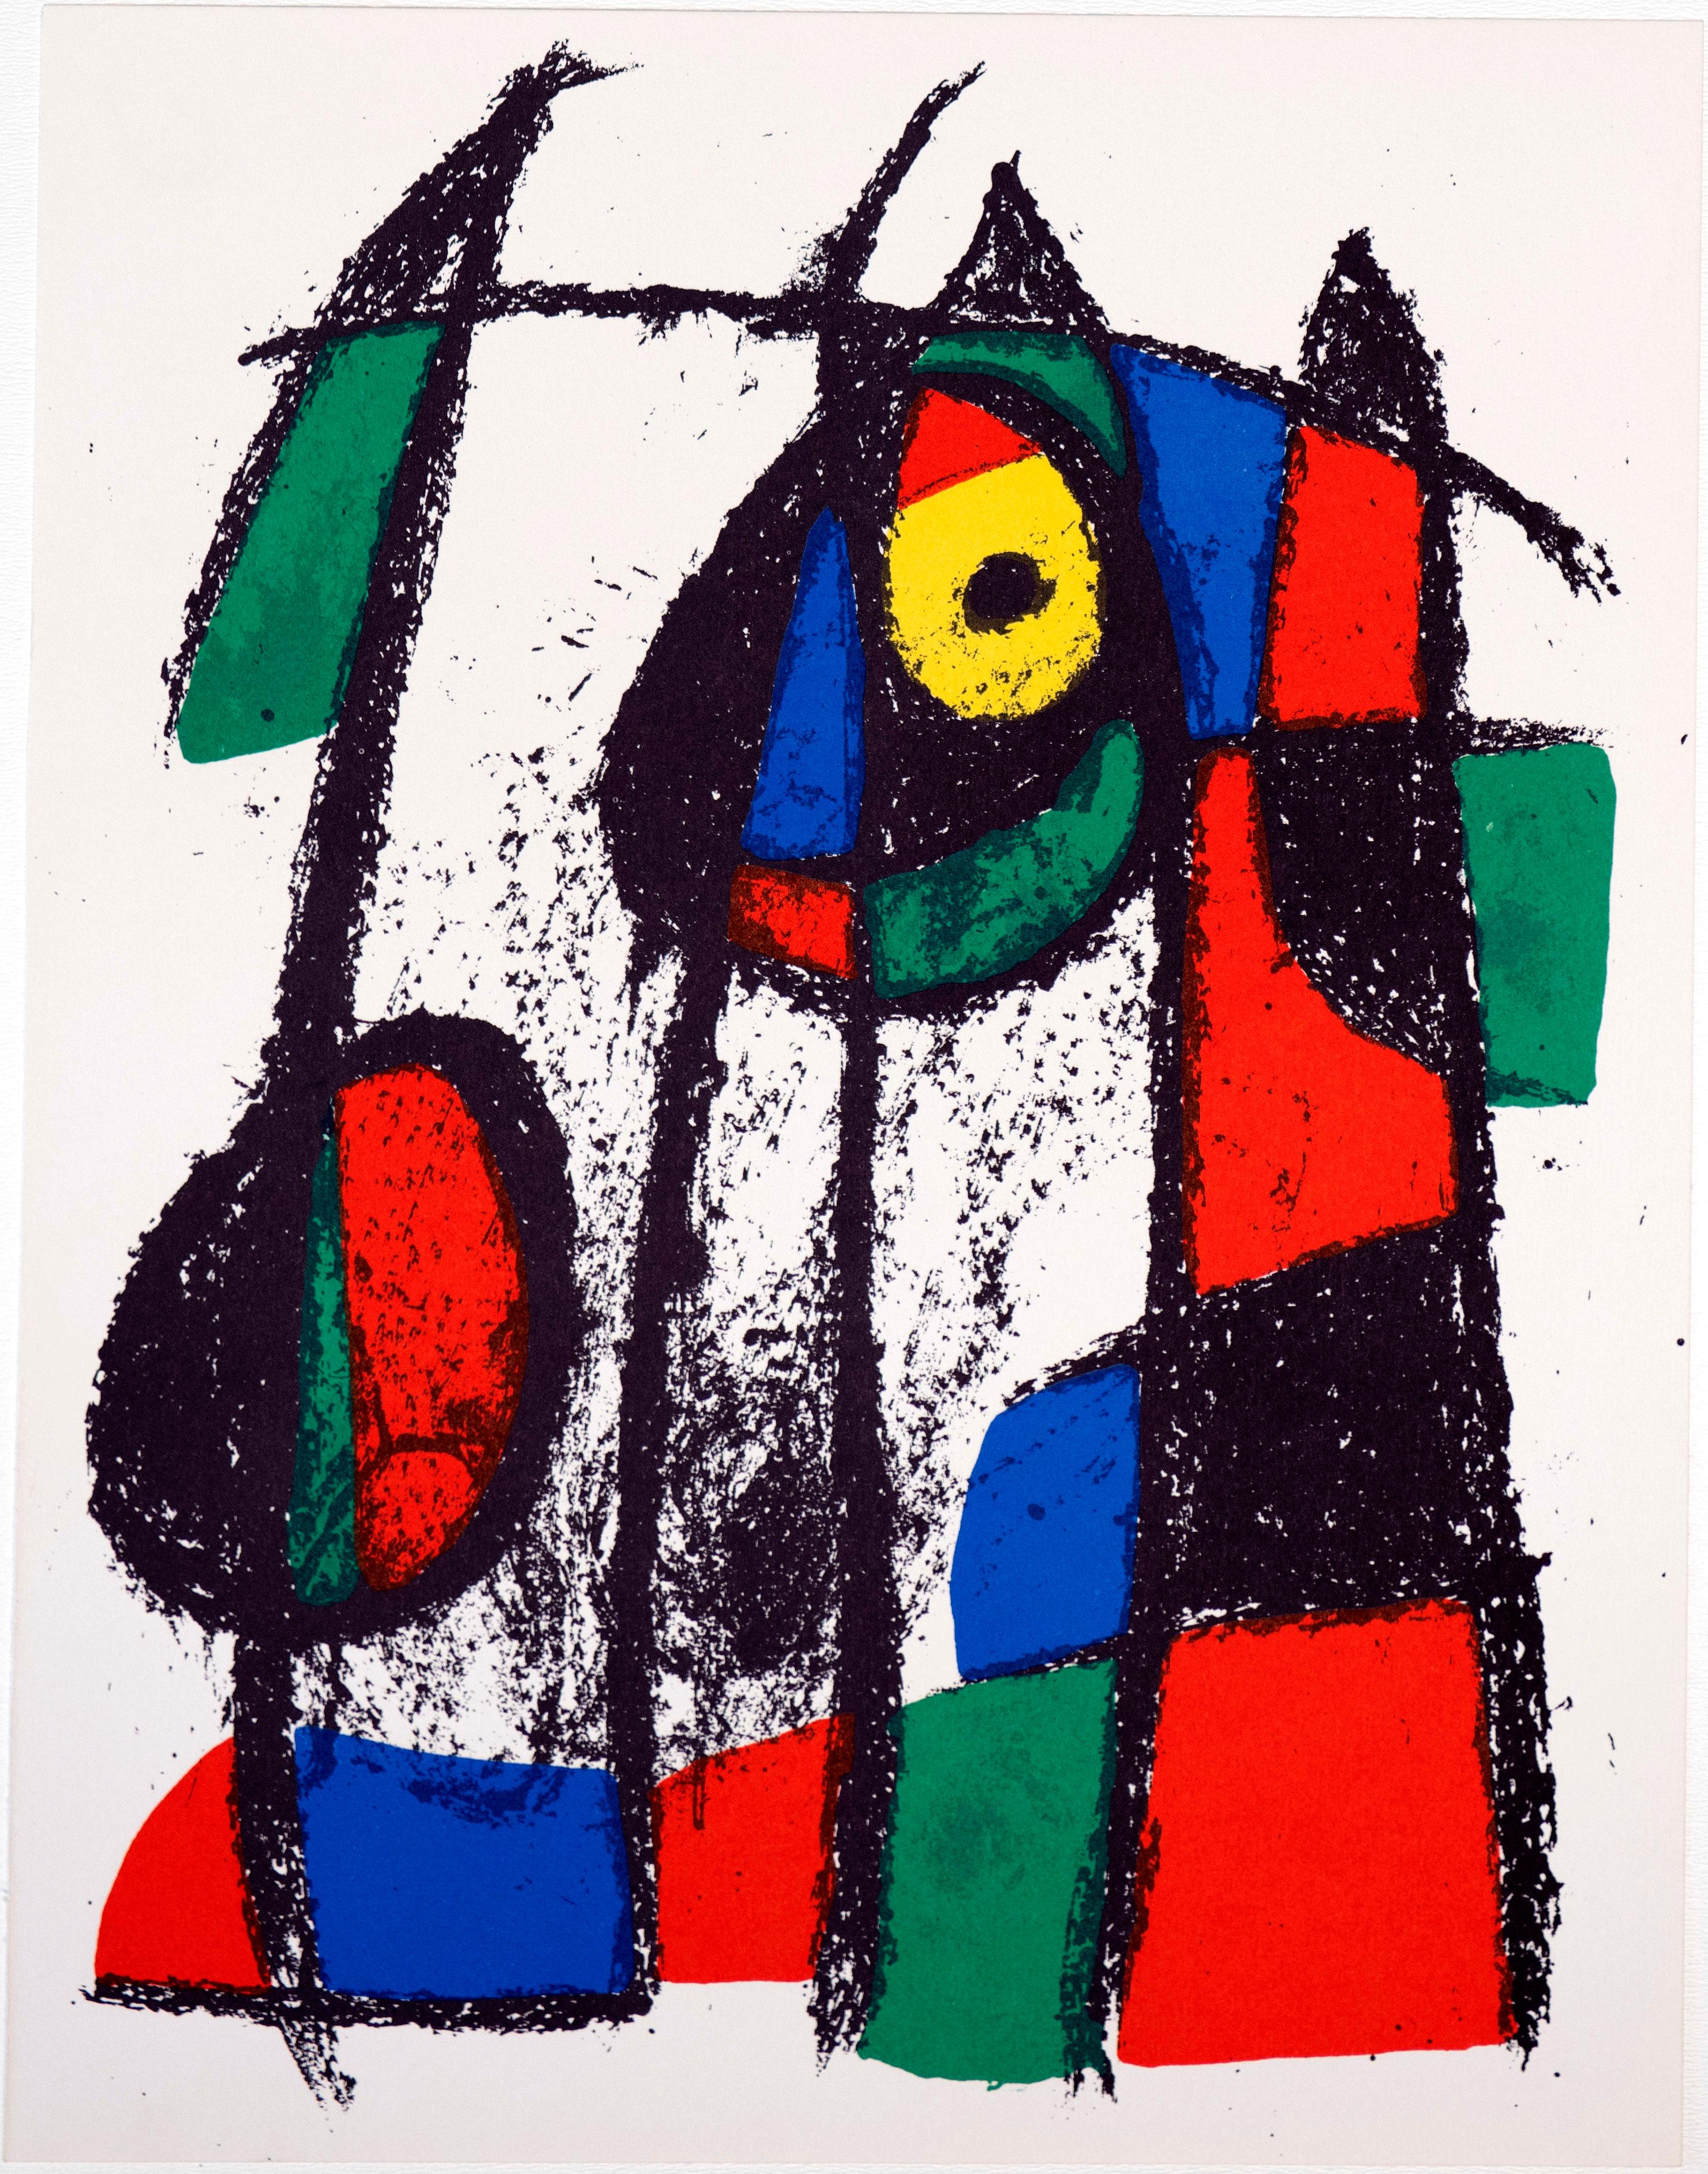 Beautiful art piece by Joan Miro: lithografia I. Ask for more information. 
Abstract Expressionism, Surrealism, Dada, Experimental, Avant-garde.

The work embraces dream imagery and “psychic automatism".

Envisioning his artistic pursuit as a